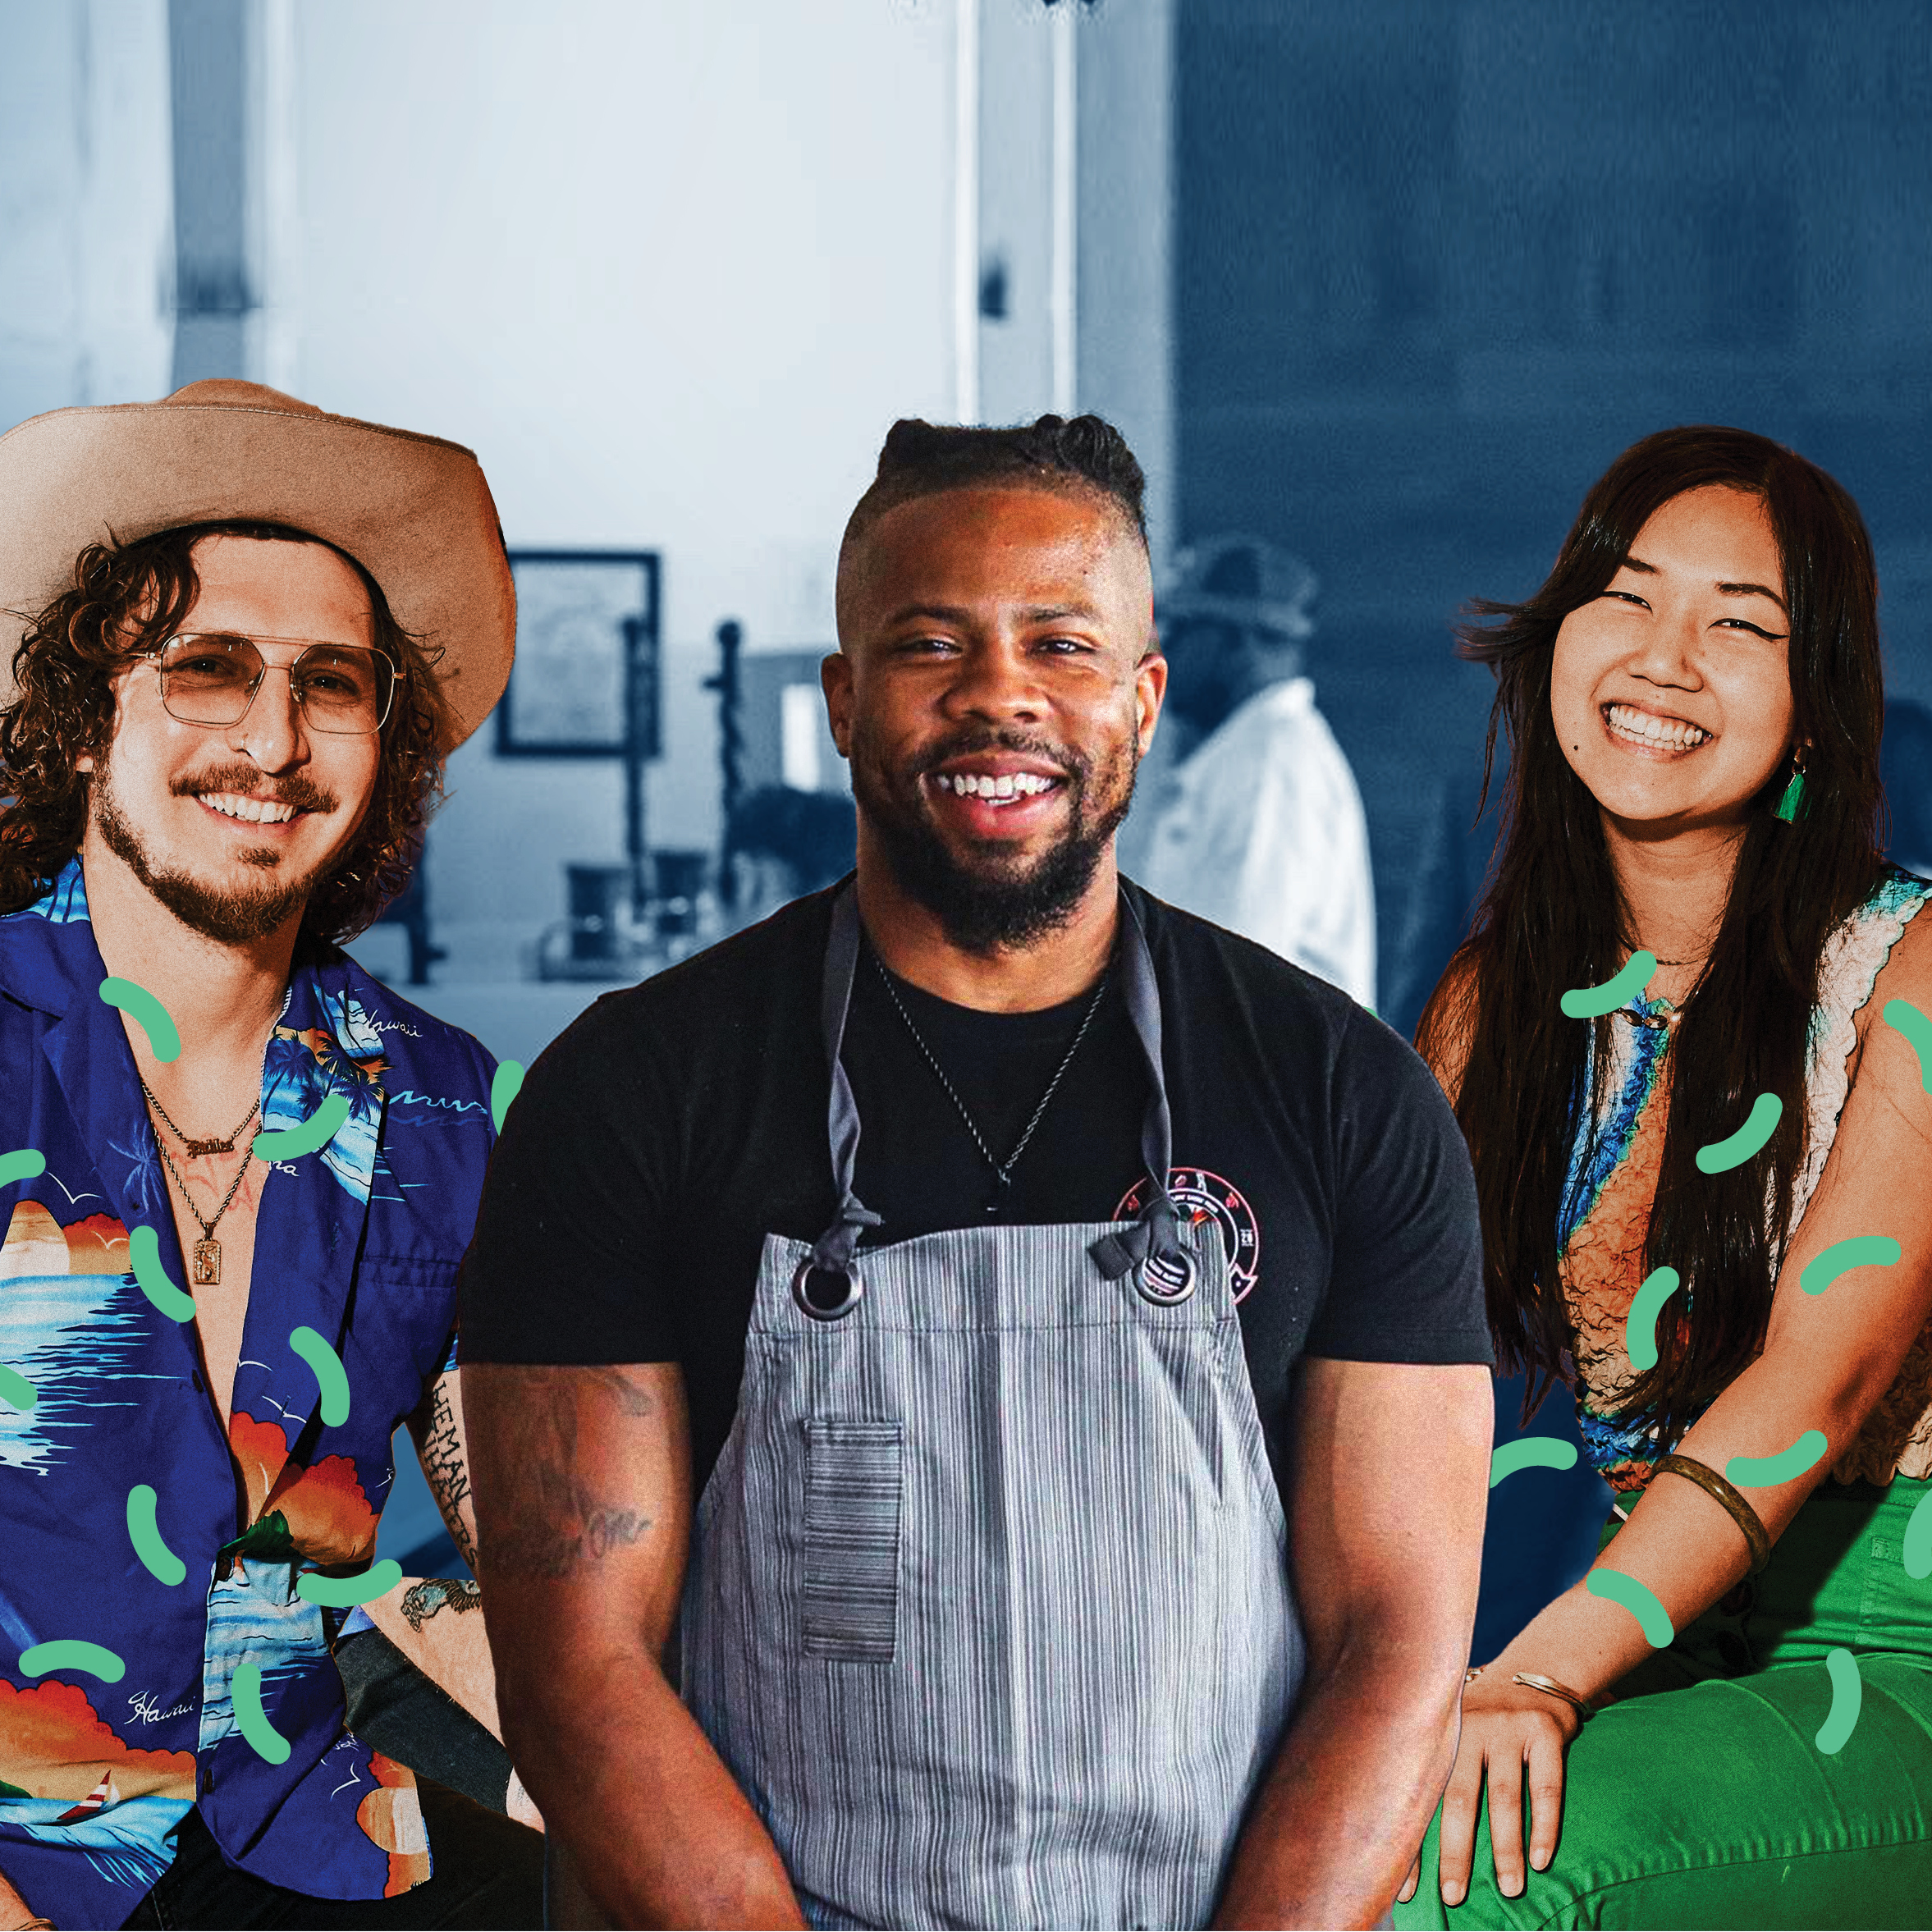 A man wearing a cowboy hat, a man wearing an apron, and woman wearing a colorful shirt all smiling in a cafe setting 